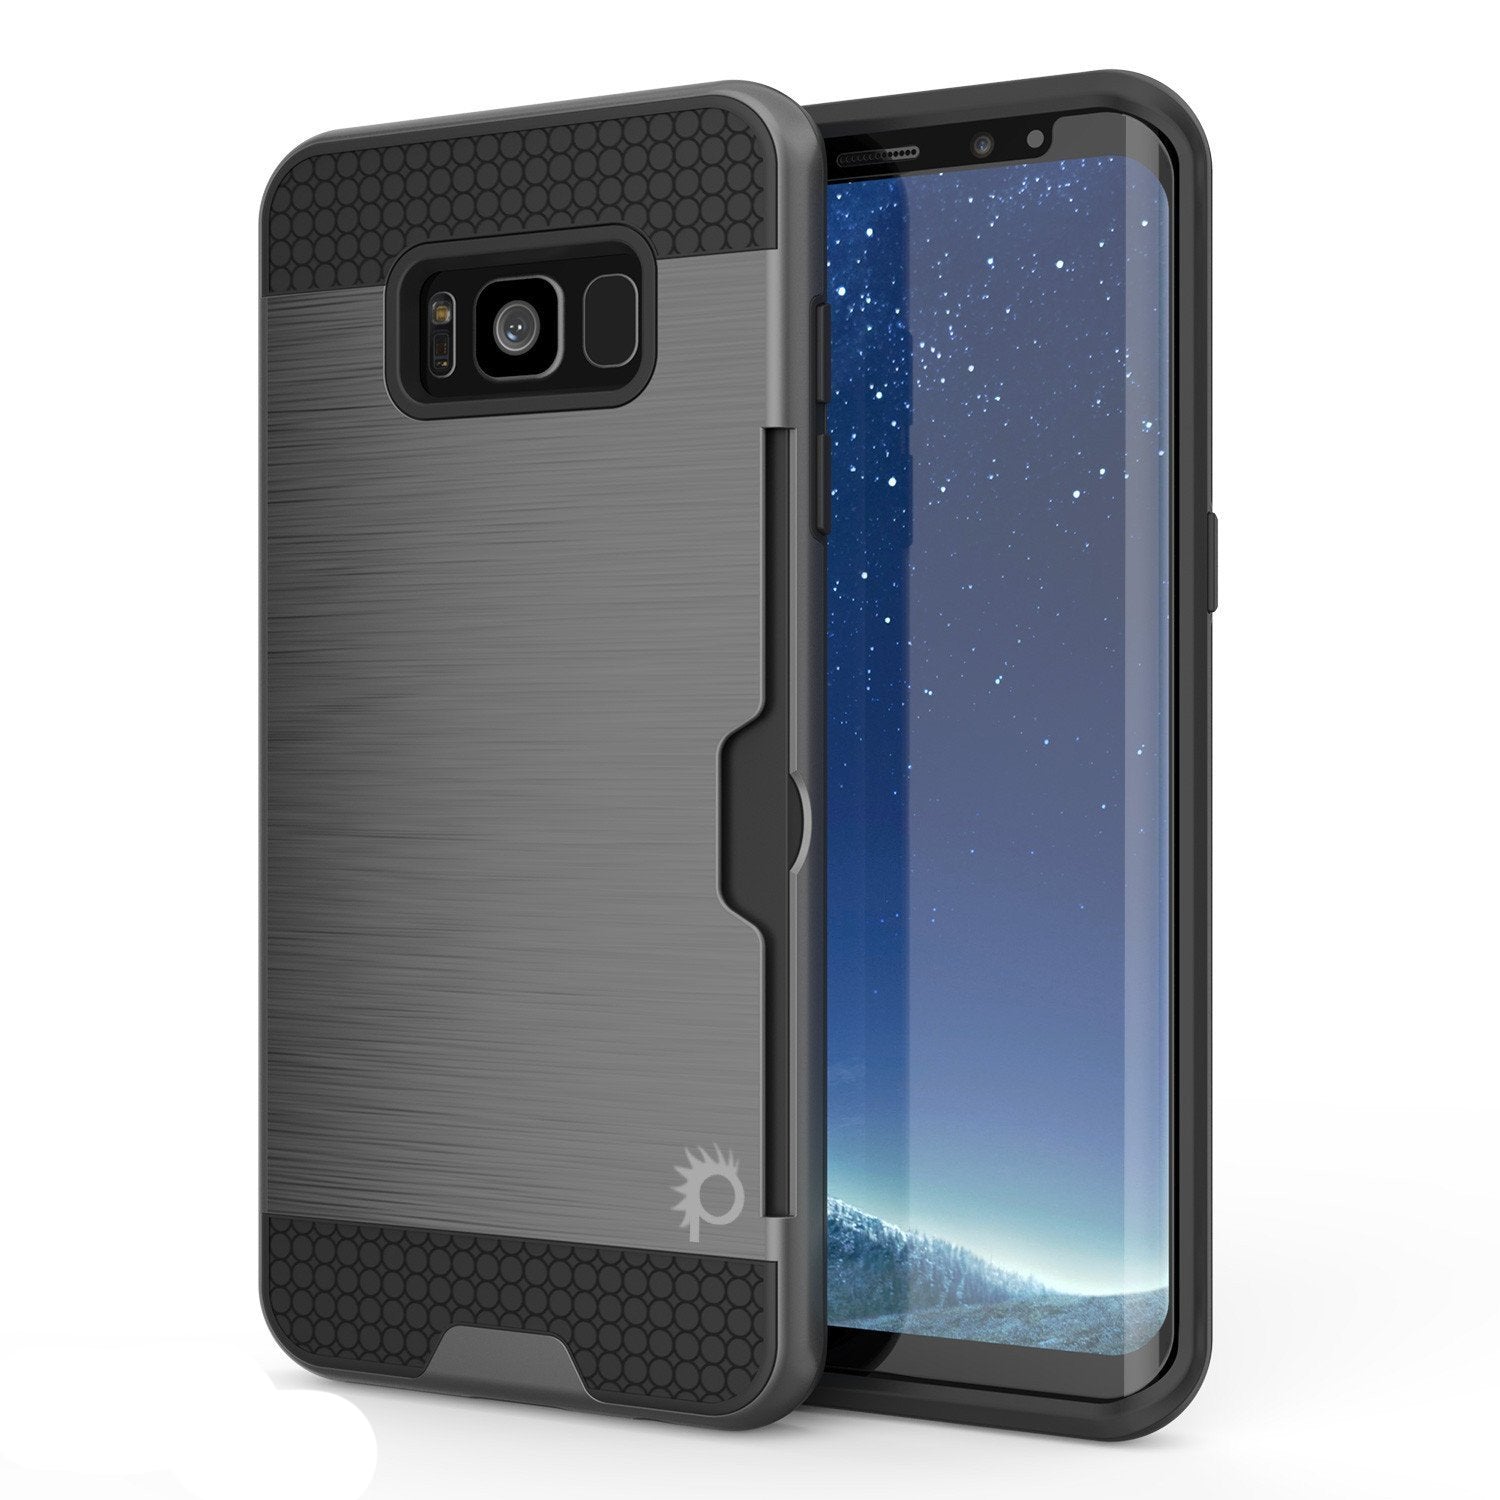 Galaxy S8 Case, PUNKcase [SLOT Series] [Slim Fit] Dual-Layer Armor Cover w/Integrated Anti-Shock System, Credit Card Slot [Grey] (Color in image: Grey)